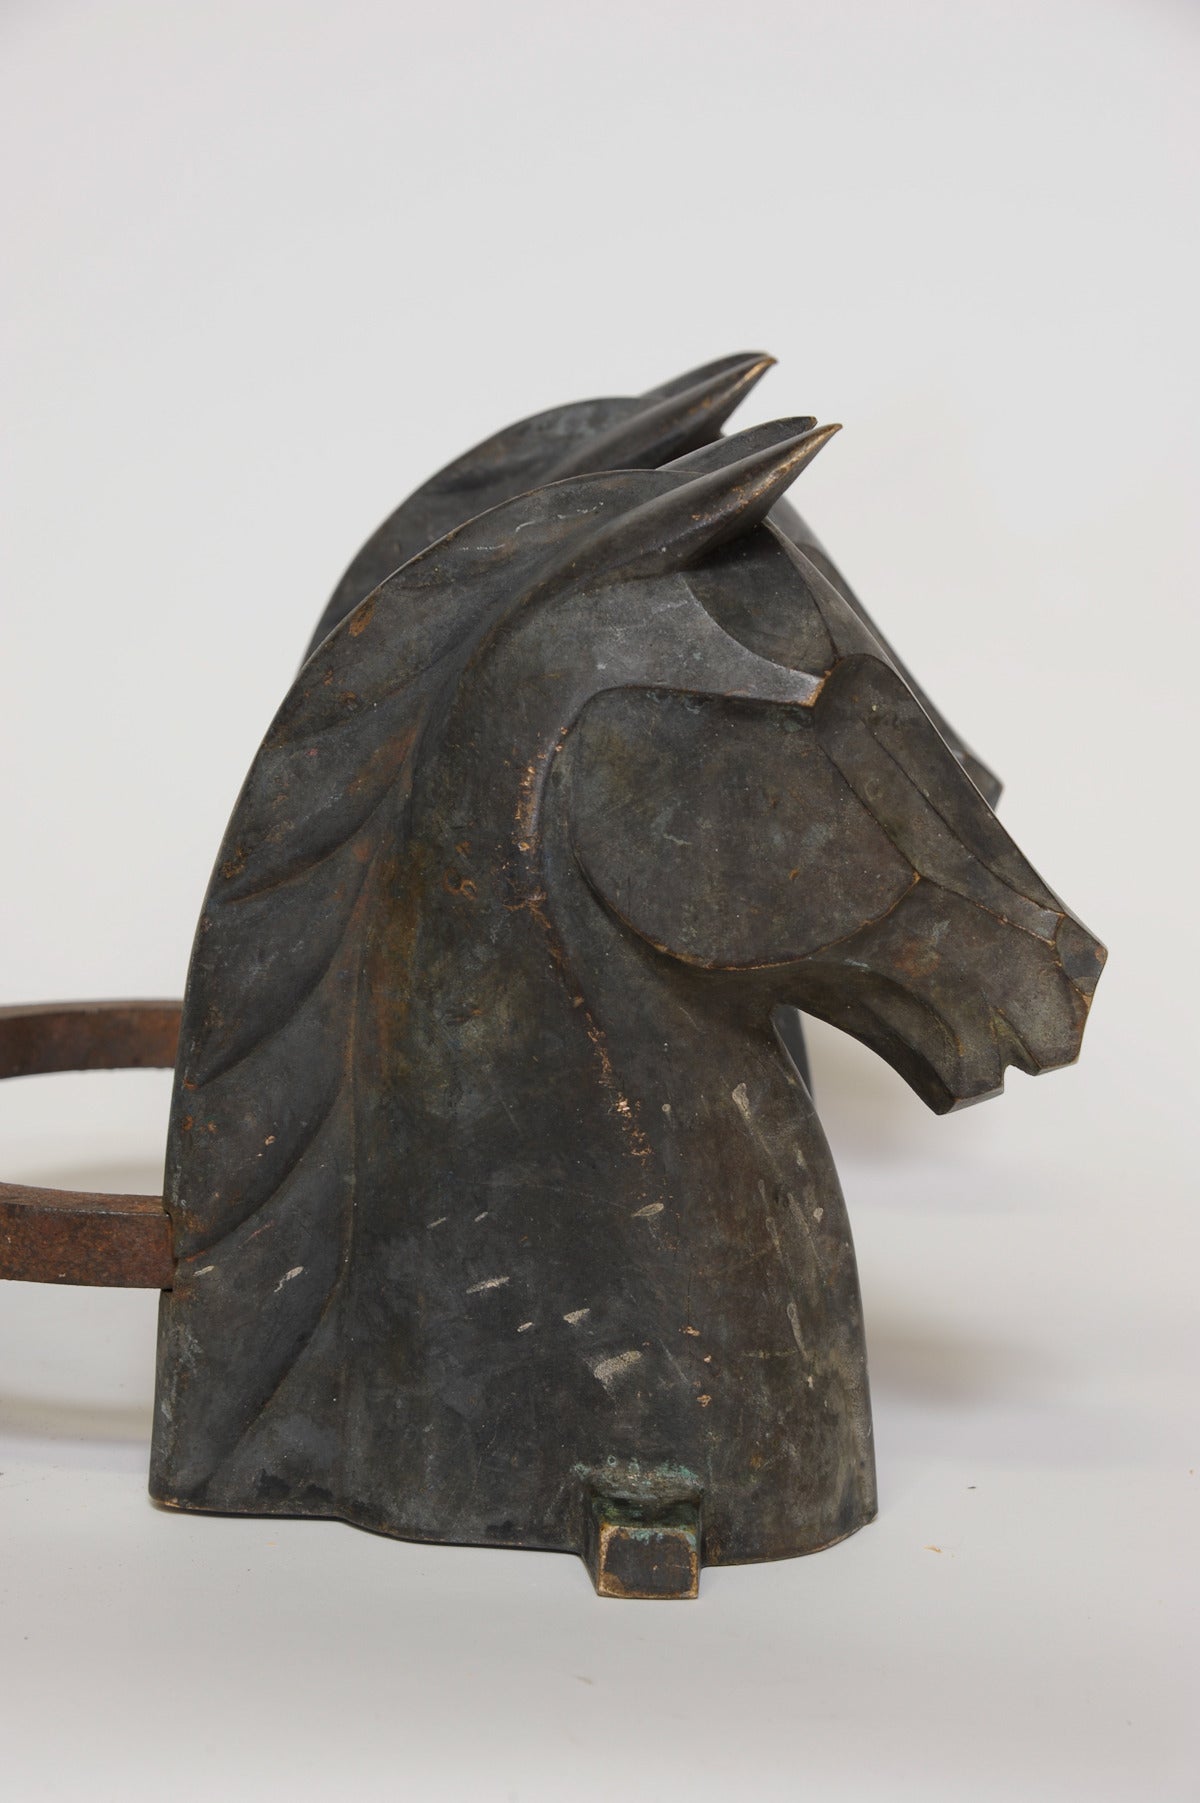 A deeply patinated pair of andirons by Reynolds Jones. These modernist horse are demanding in both their style and scale. The heads are wonderfully patinated, they can be polished to a brass shine if desired for an extra fee.